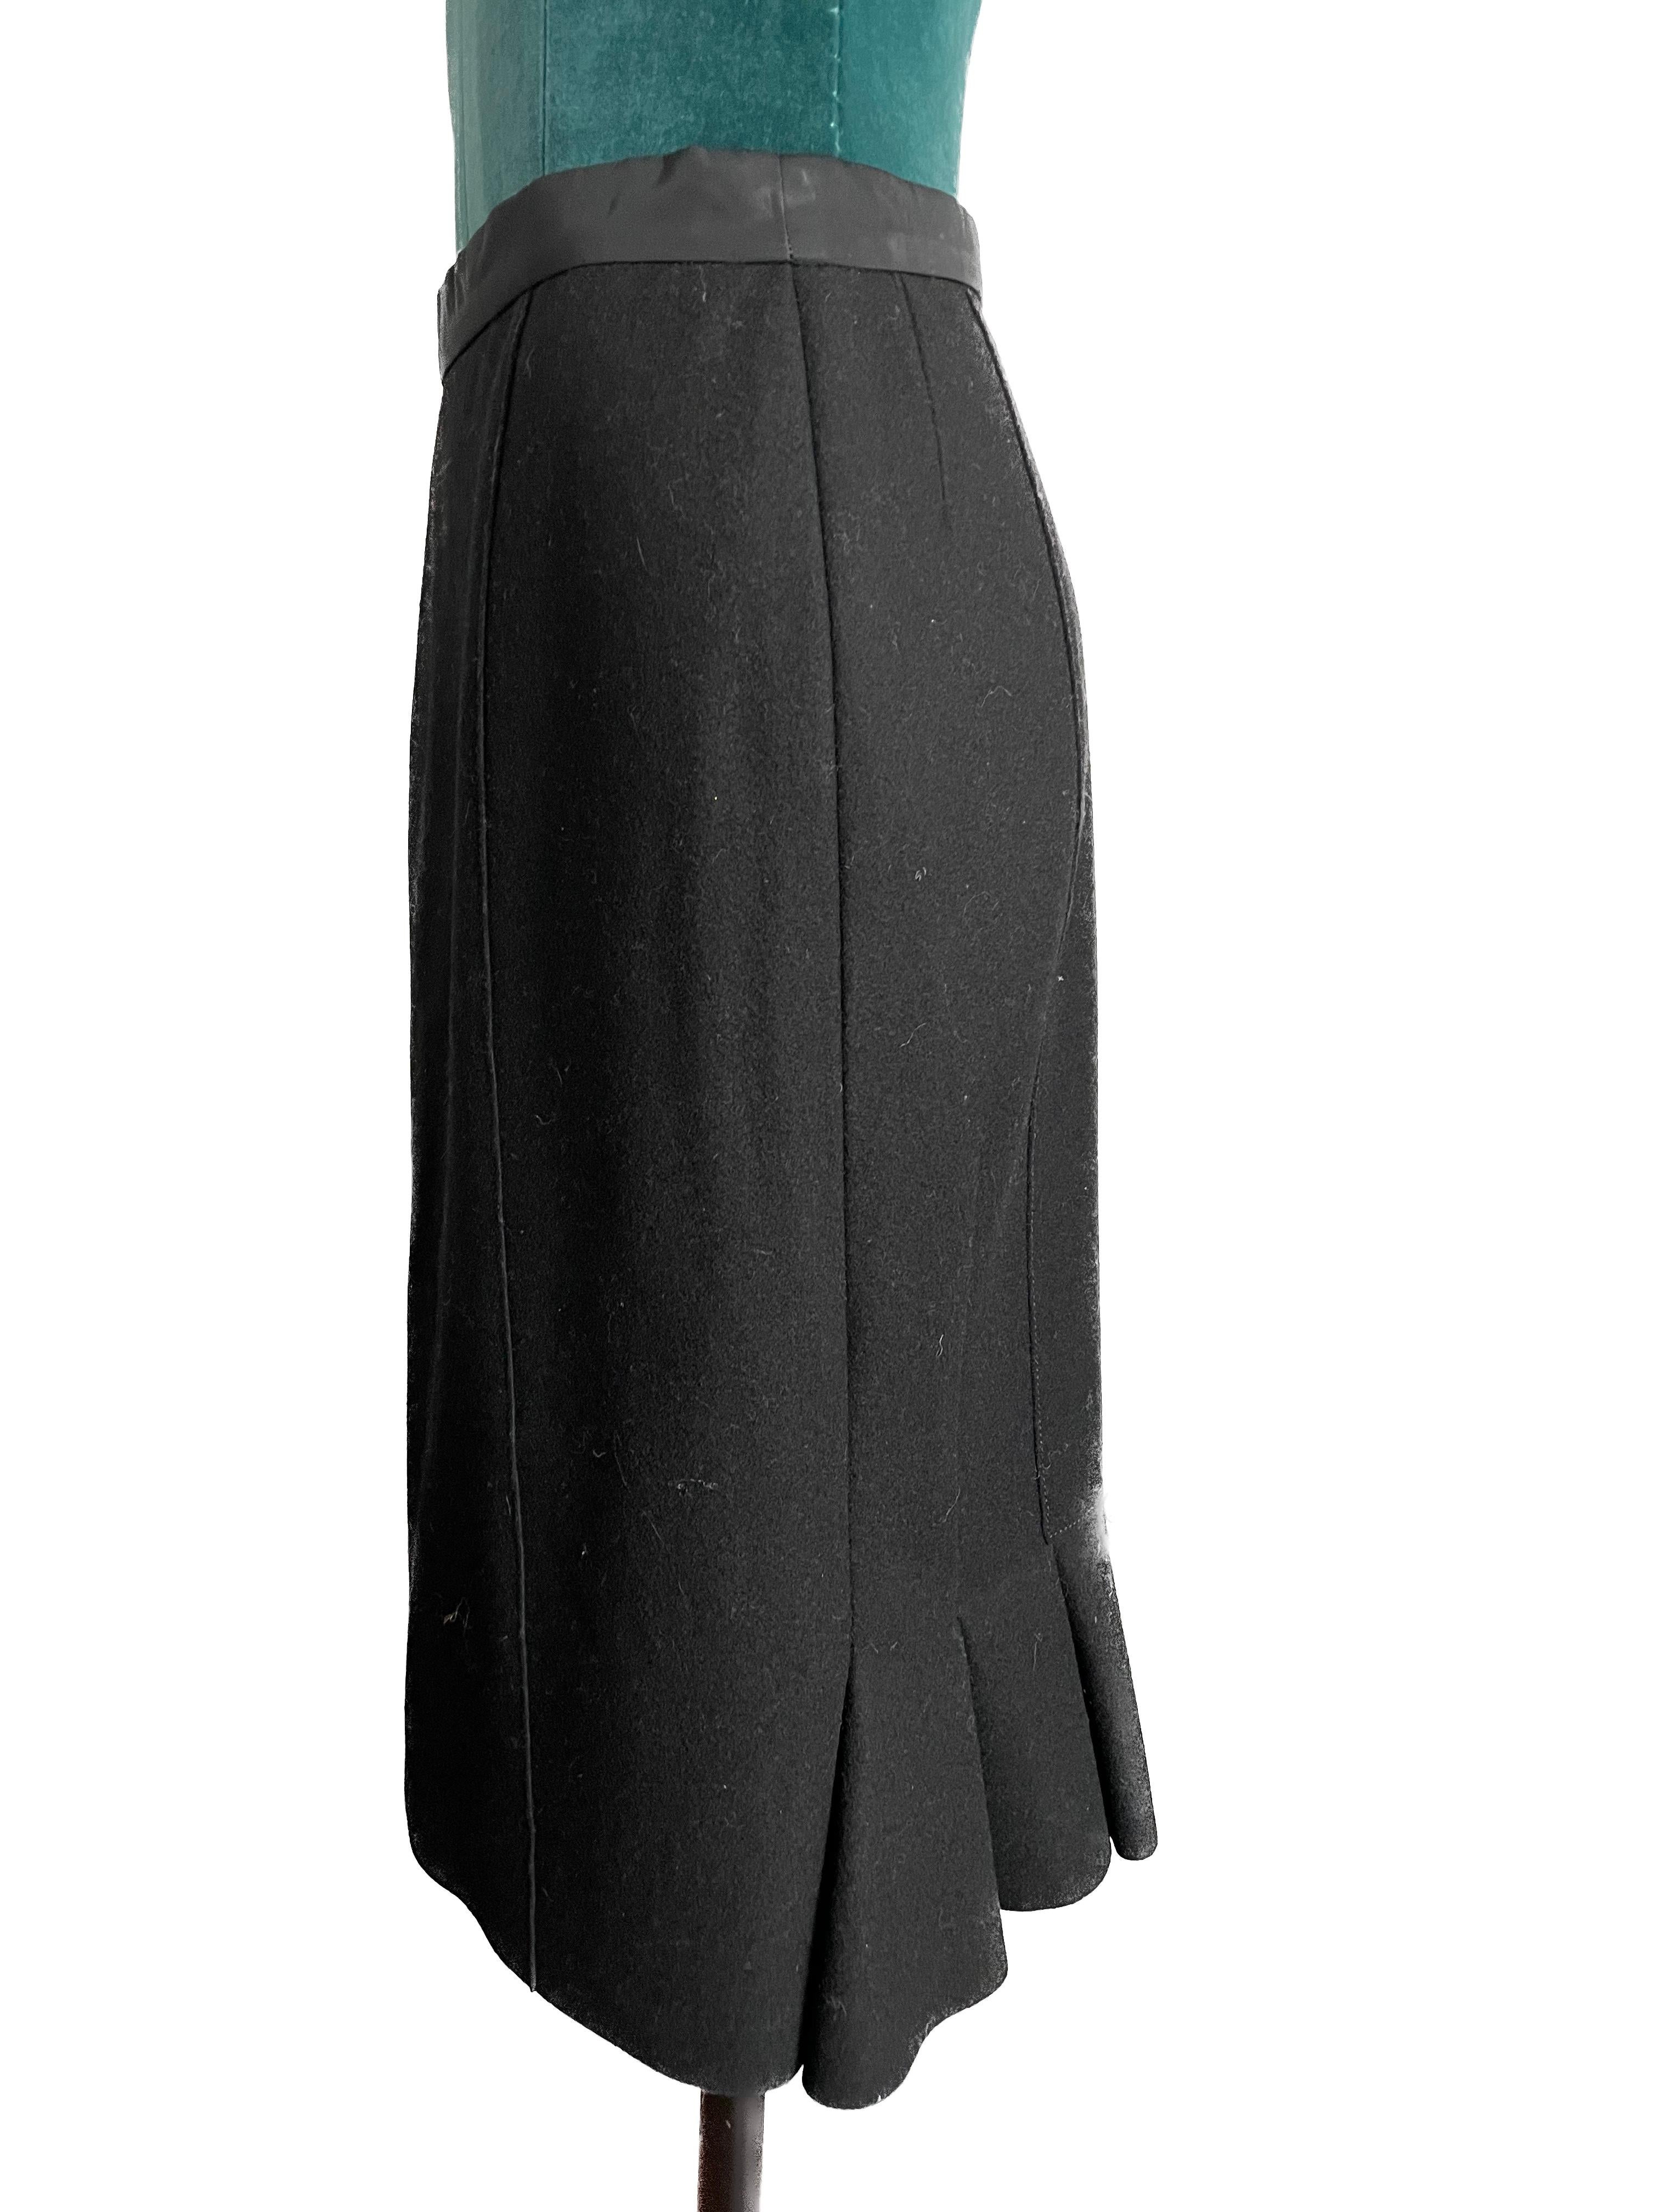 The Louis Vuitton Black Pencil Skirt with Flair Detail in the back is a masterful blend of classic sophistication and contemporary flair, showcasing the renowned craftsmanship and design prowess of the iconic fashion house. This impeccably tailored